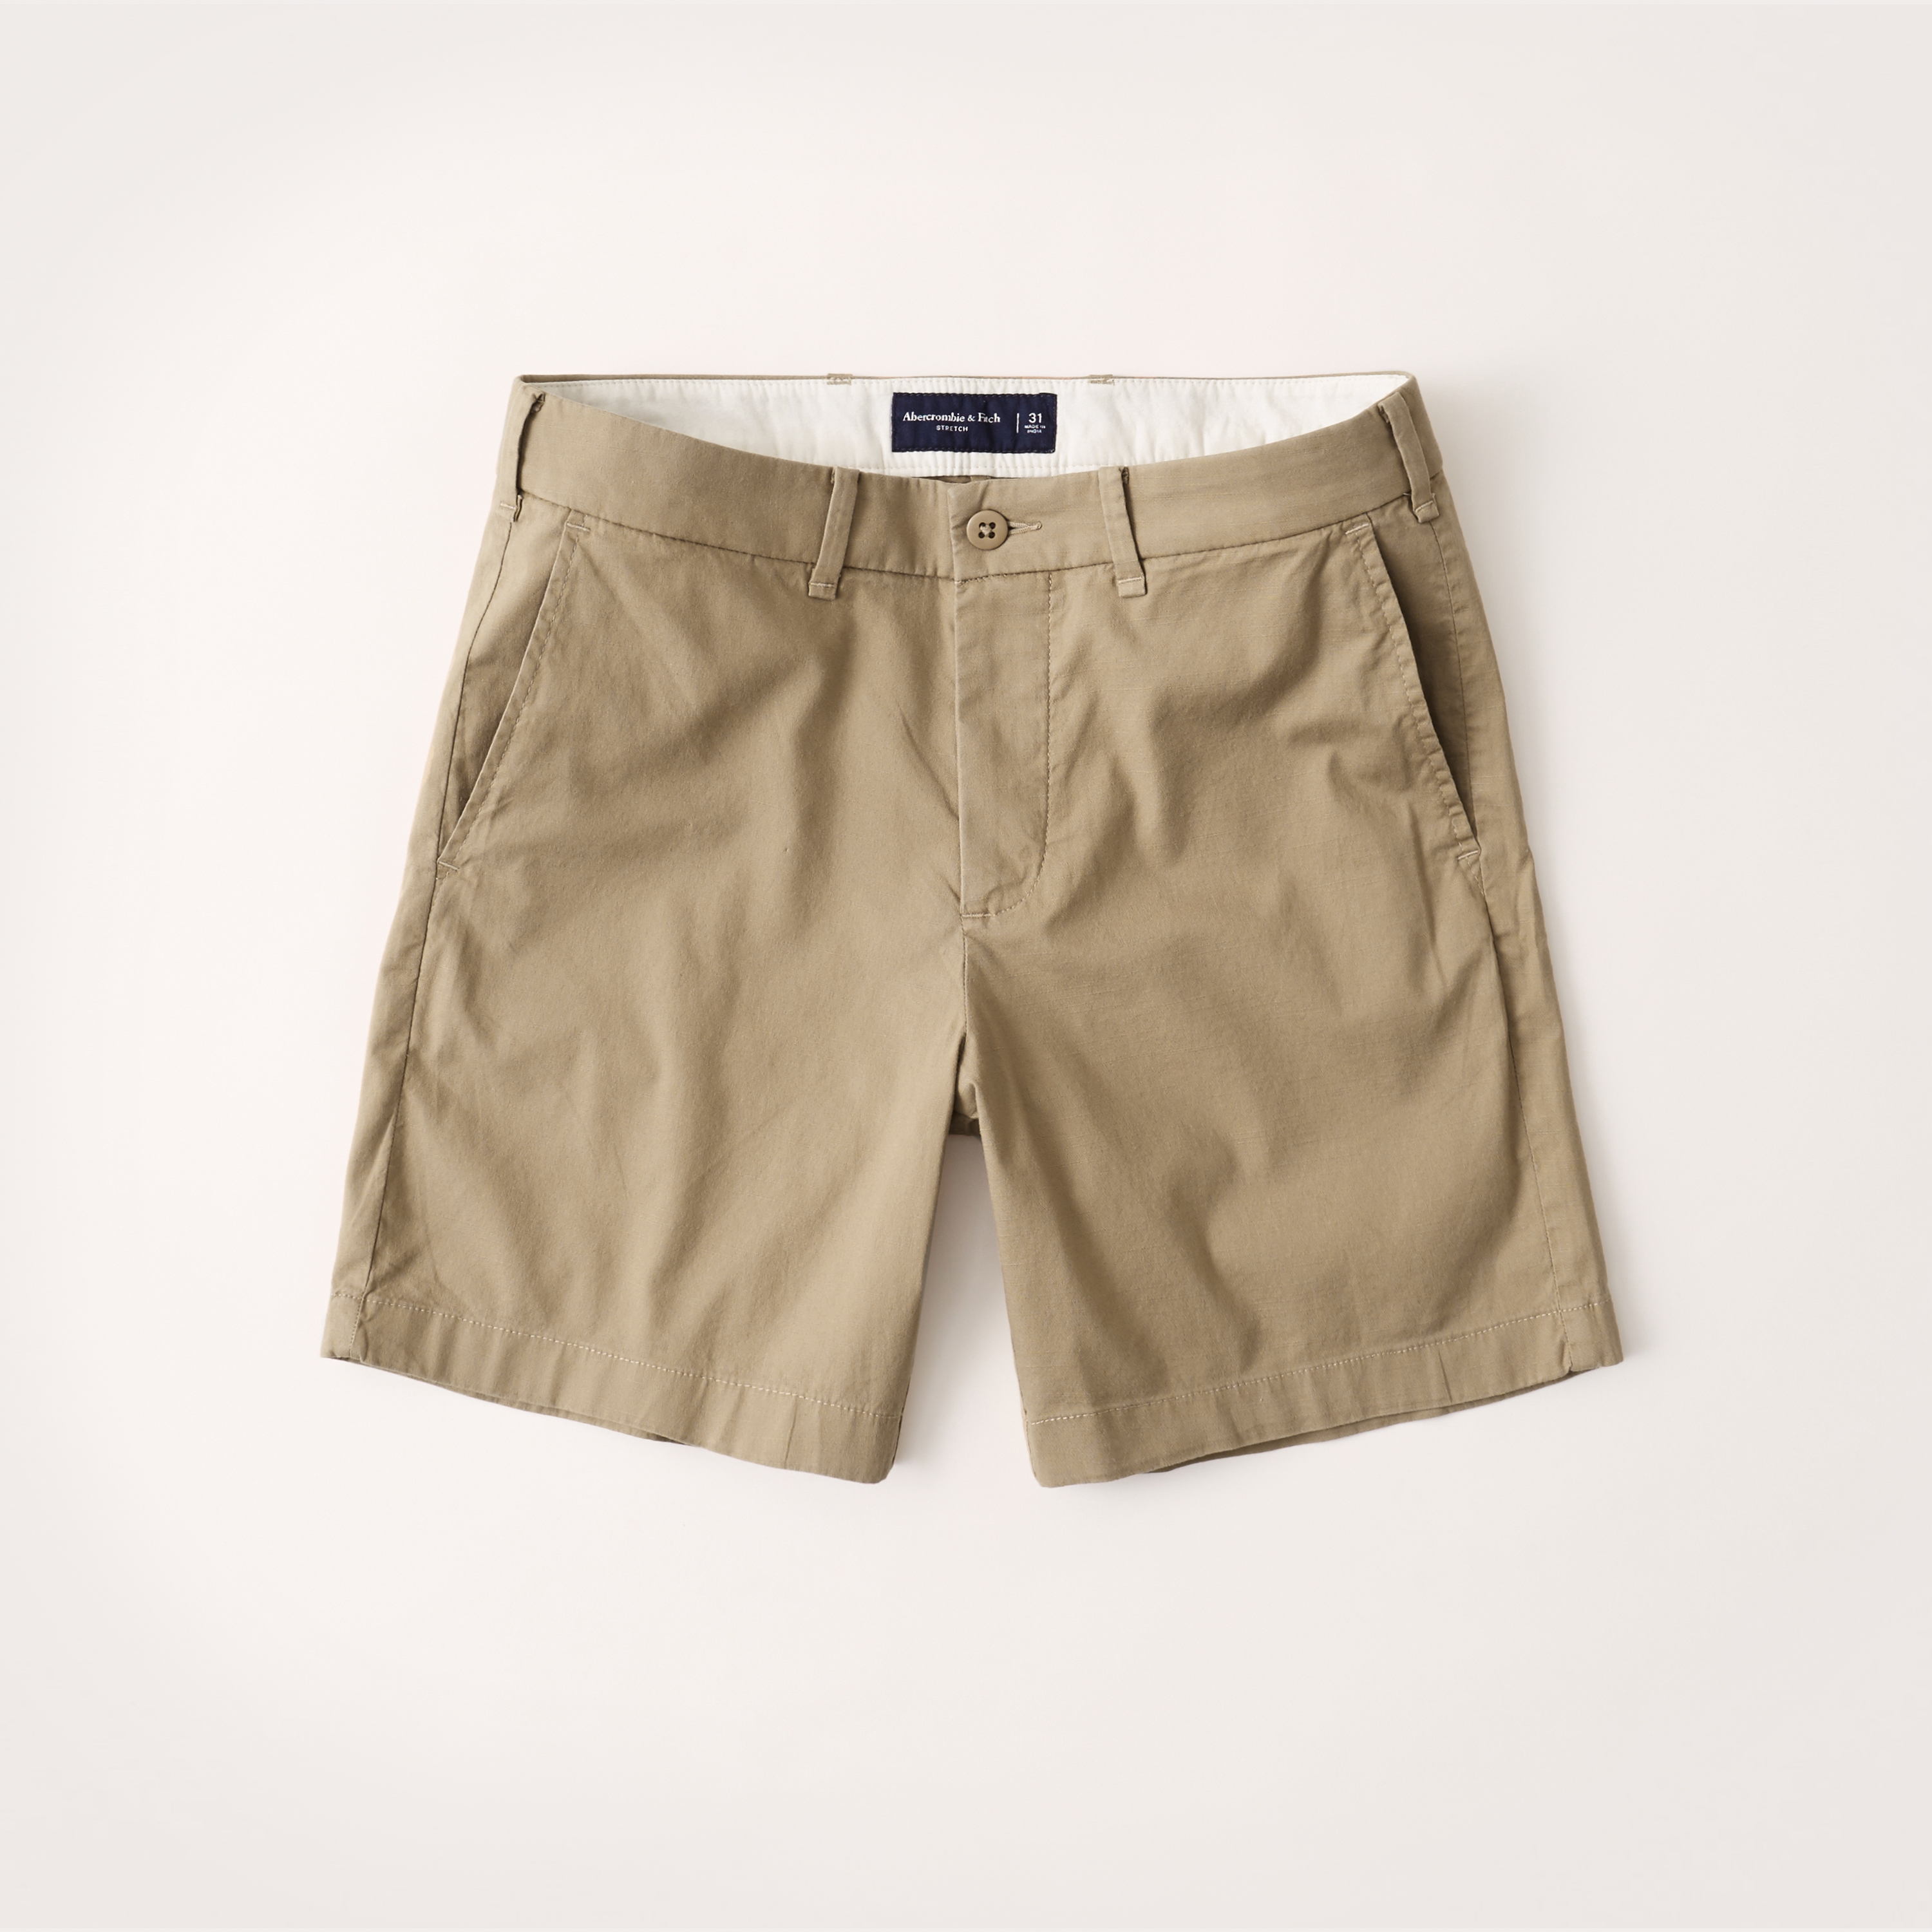 abercrombie and fitch khaki shorts